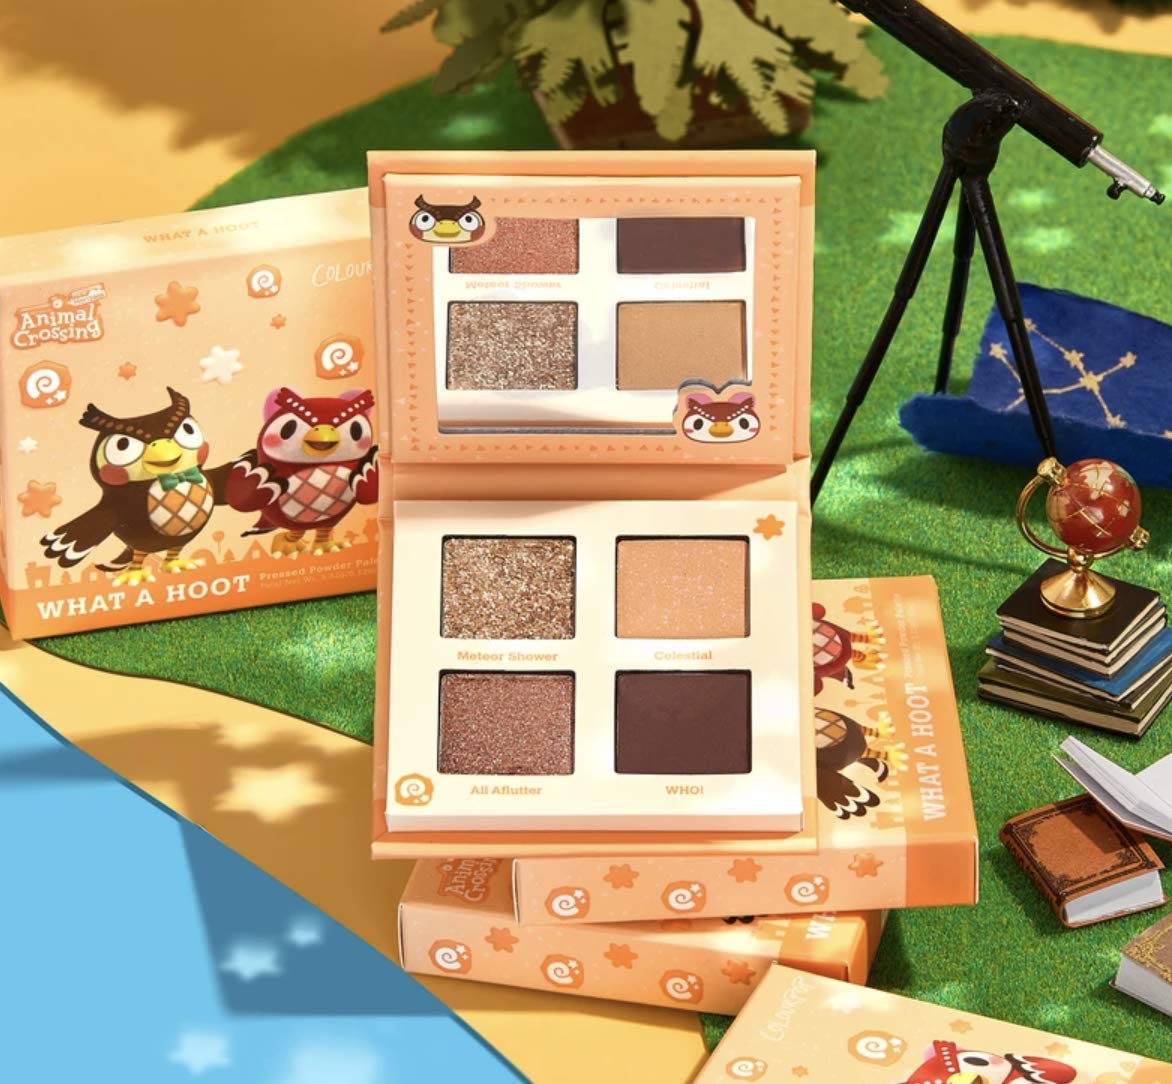 Colourpop Animal Crossing Eyeshadow Palette 'What a Hoot!' - Shadow Quad Full Size New without Box,Powder